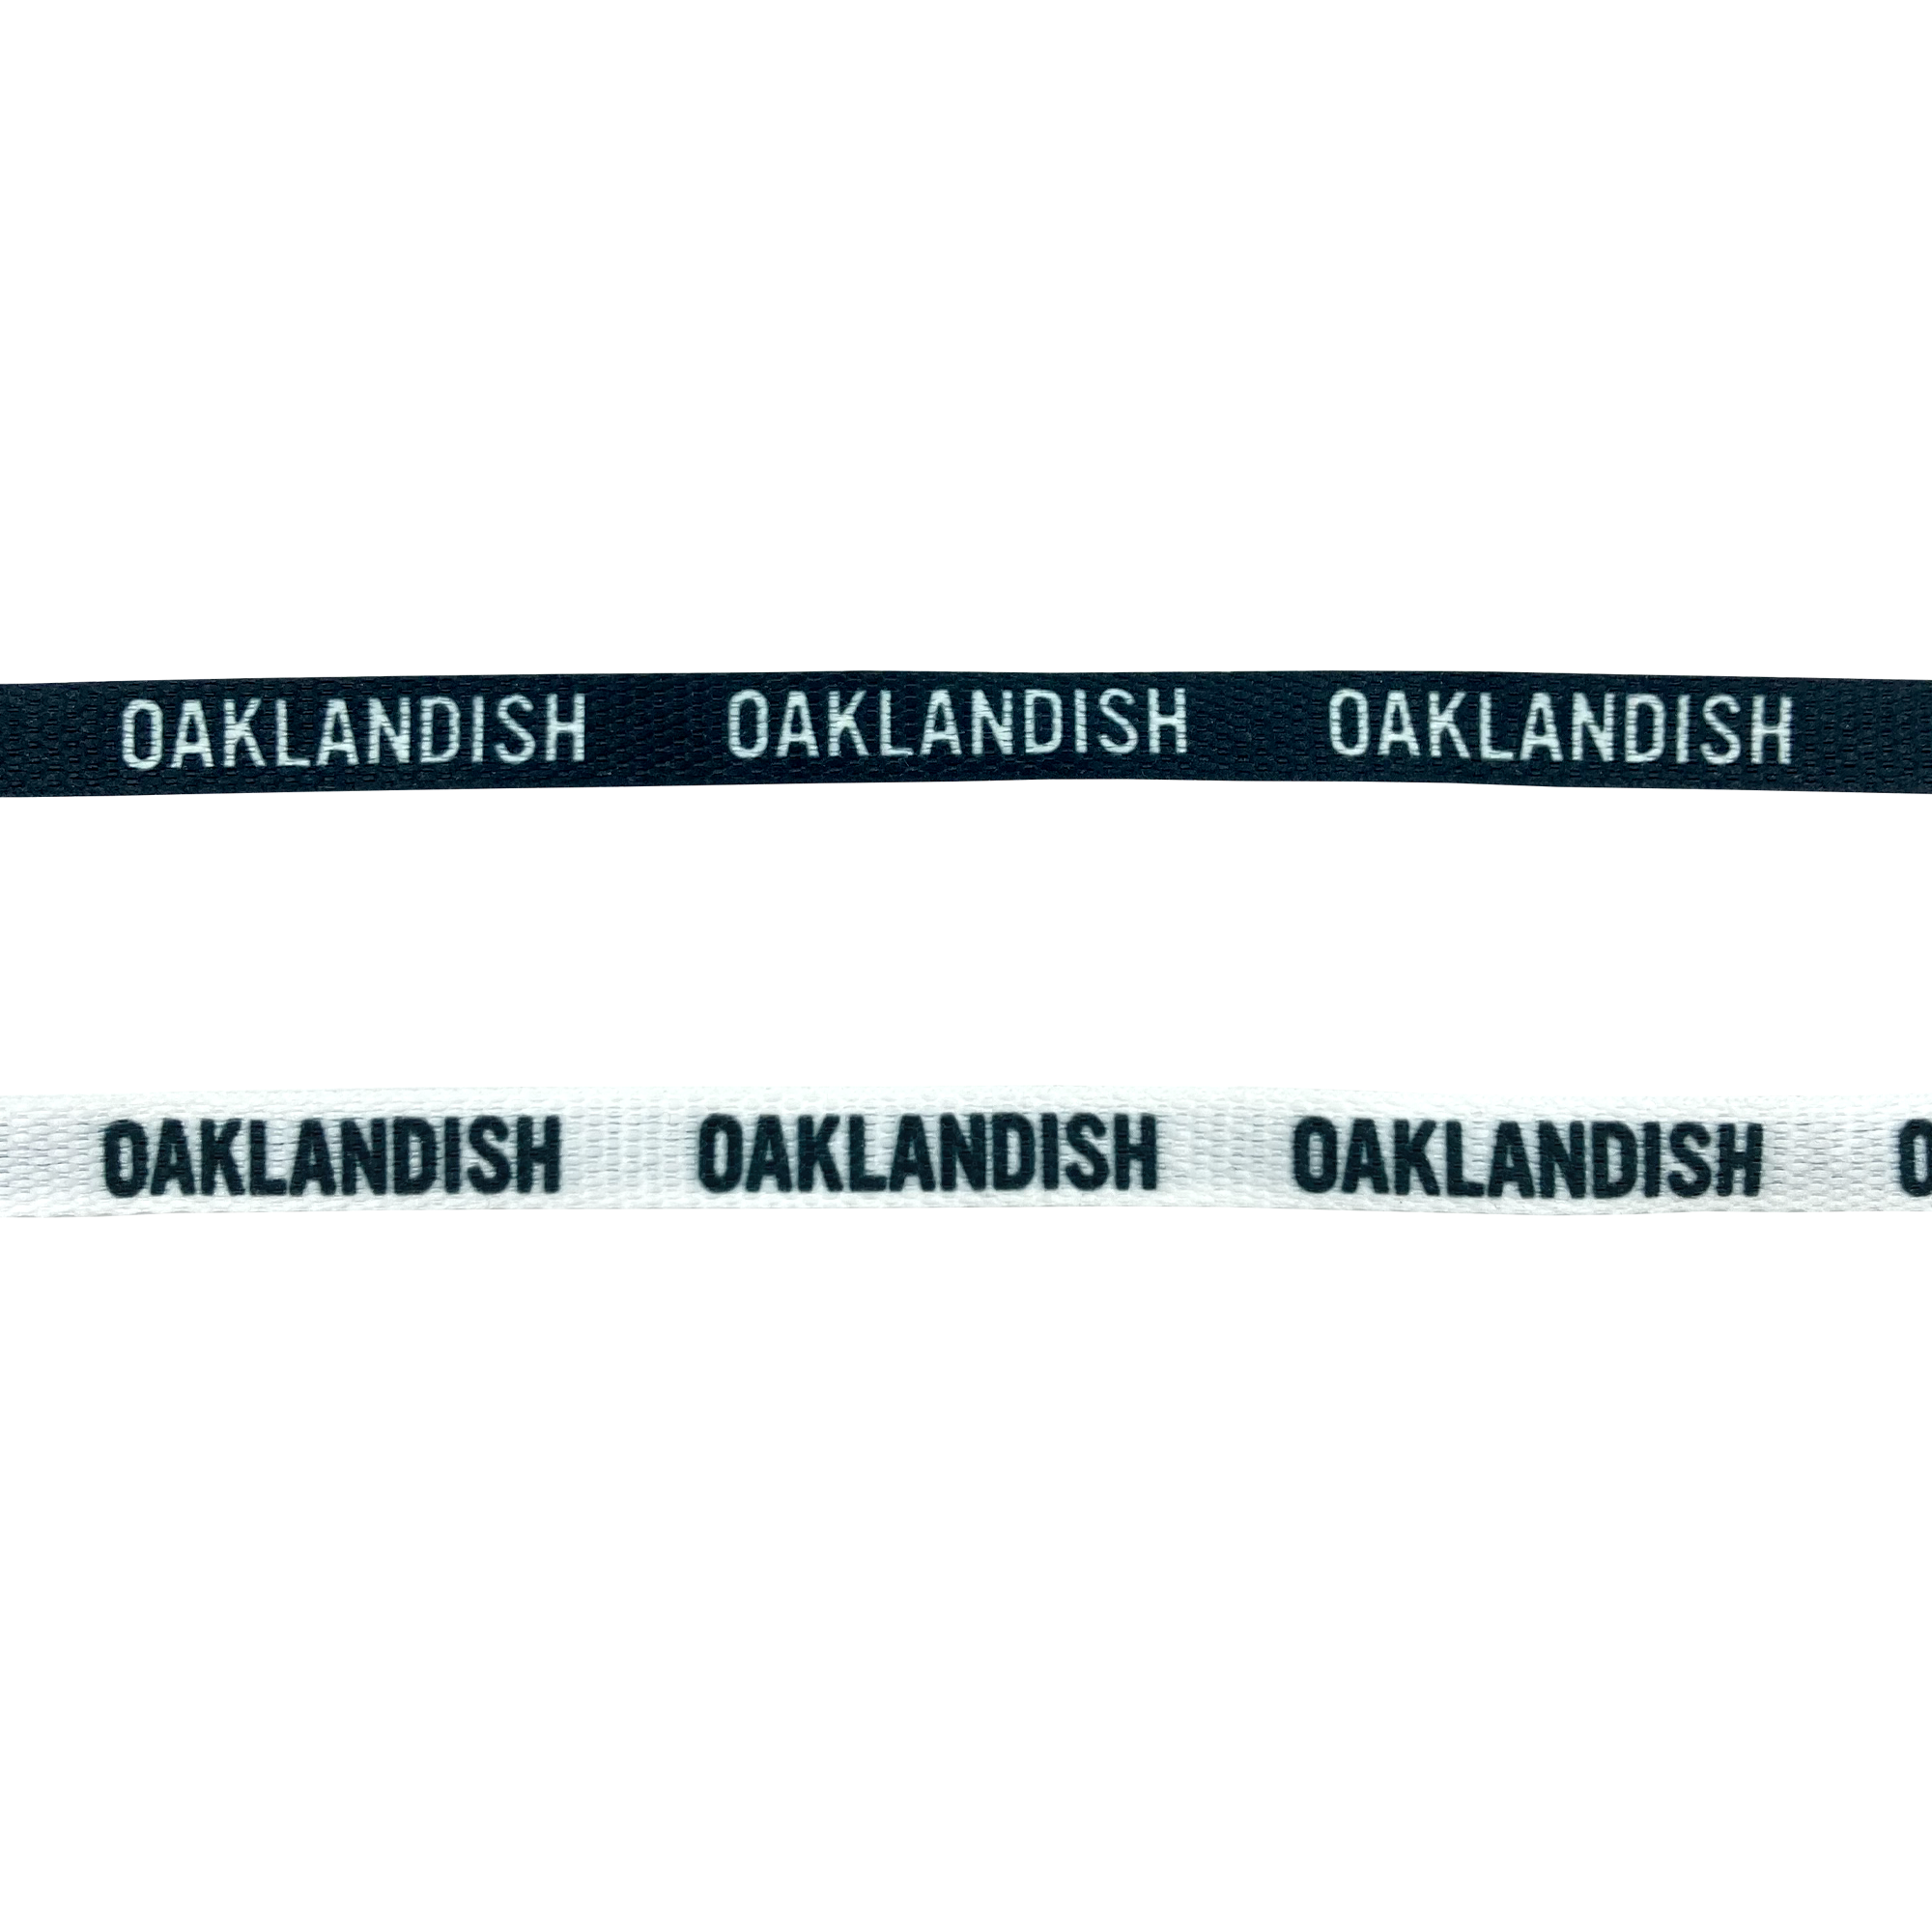 Two shoelaces one white and one black with OAKLANDISH wordmark on repeat.